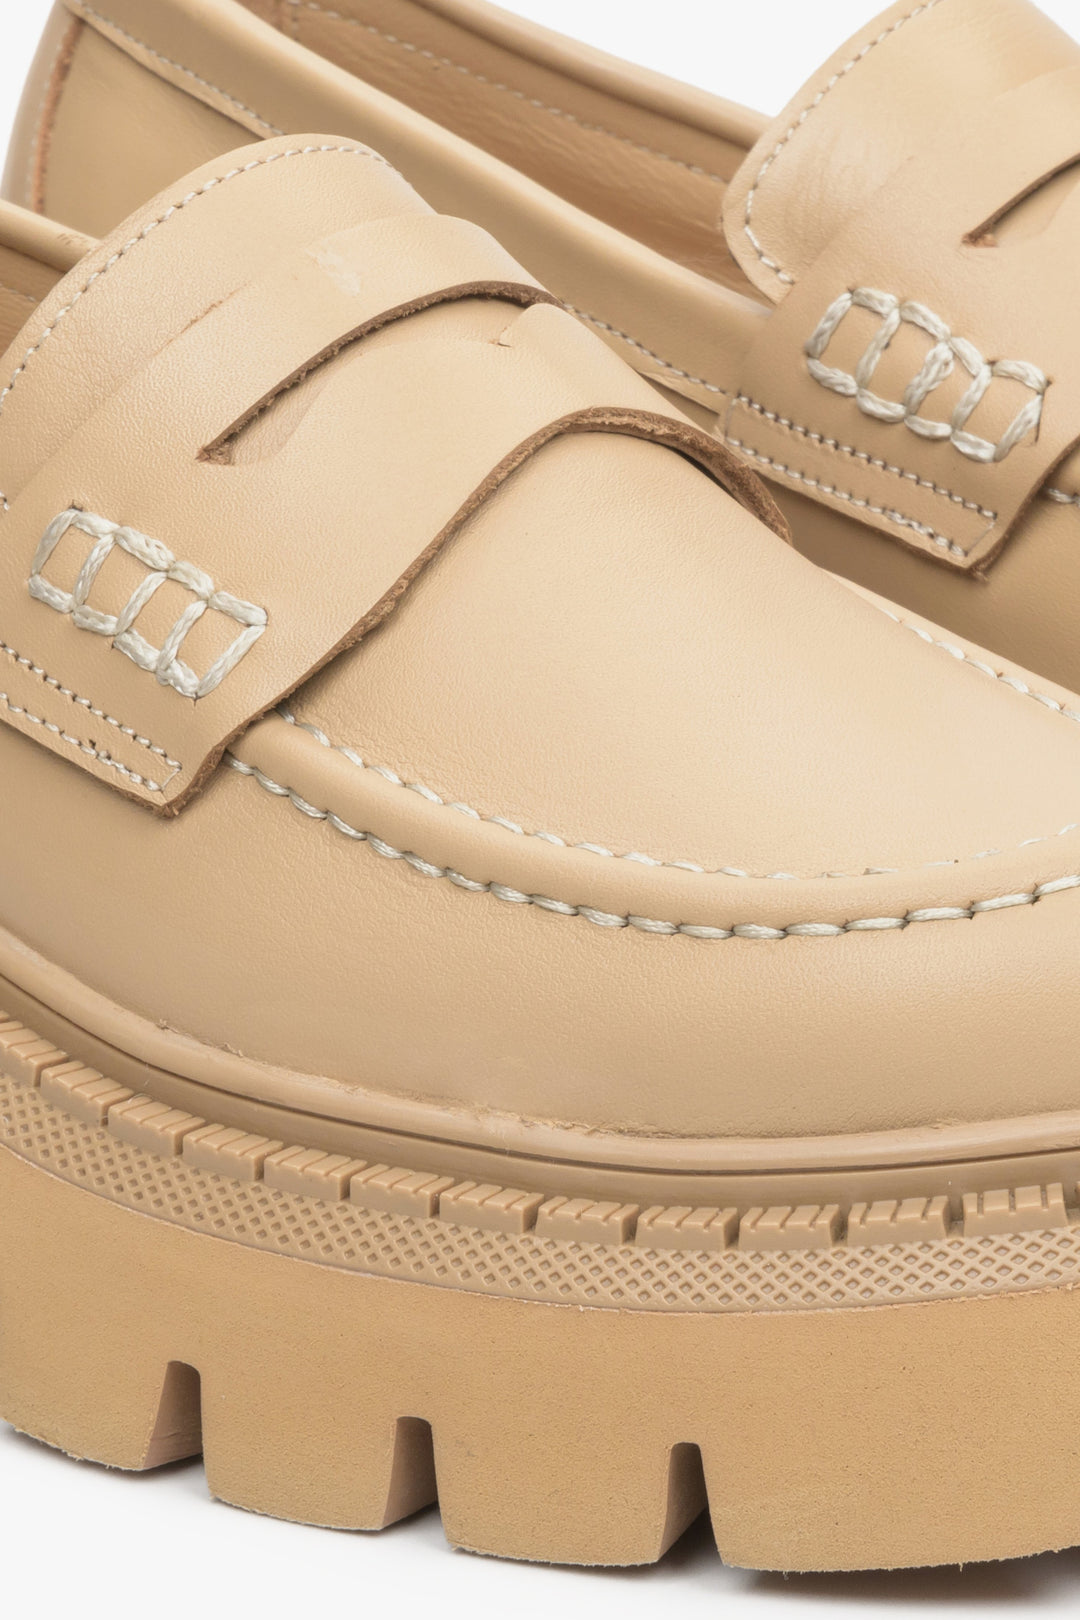 Women's, leather Estro loafers in beige - close-up on the detail.